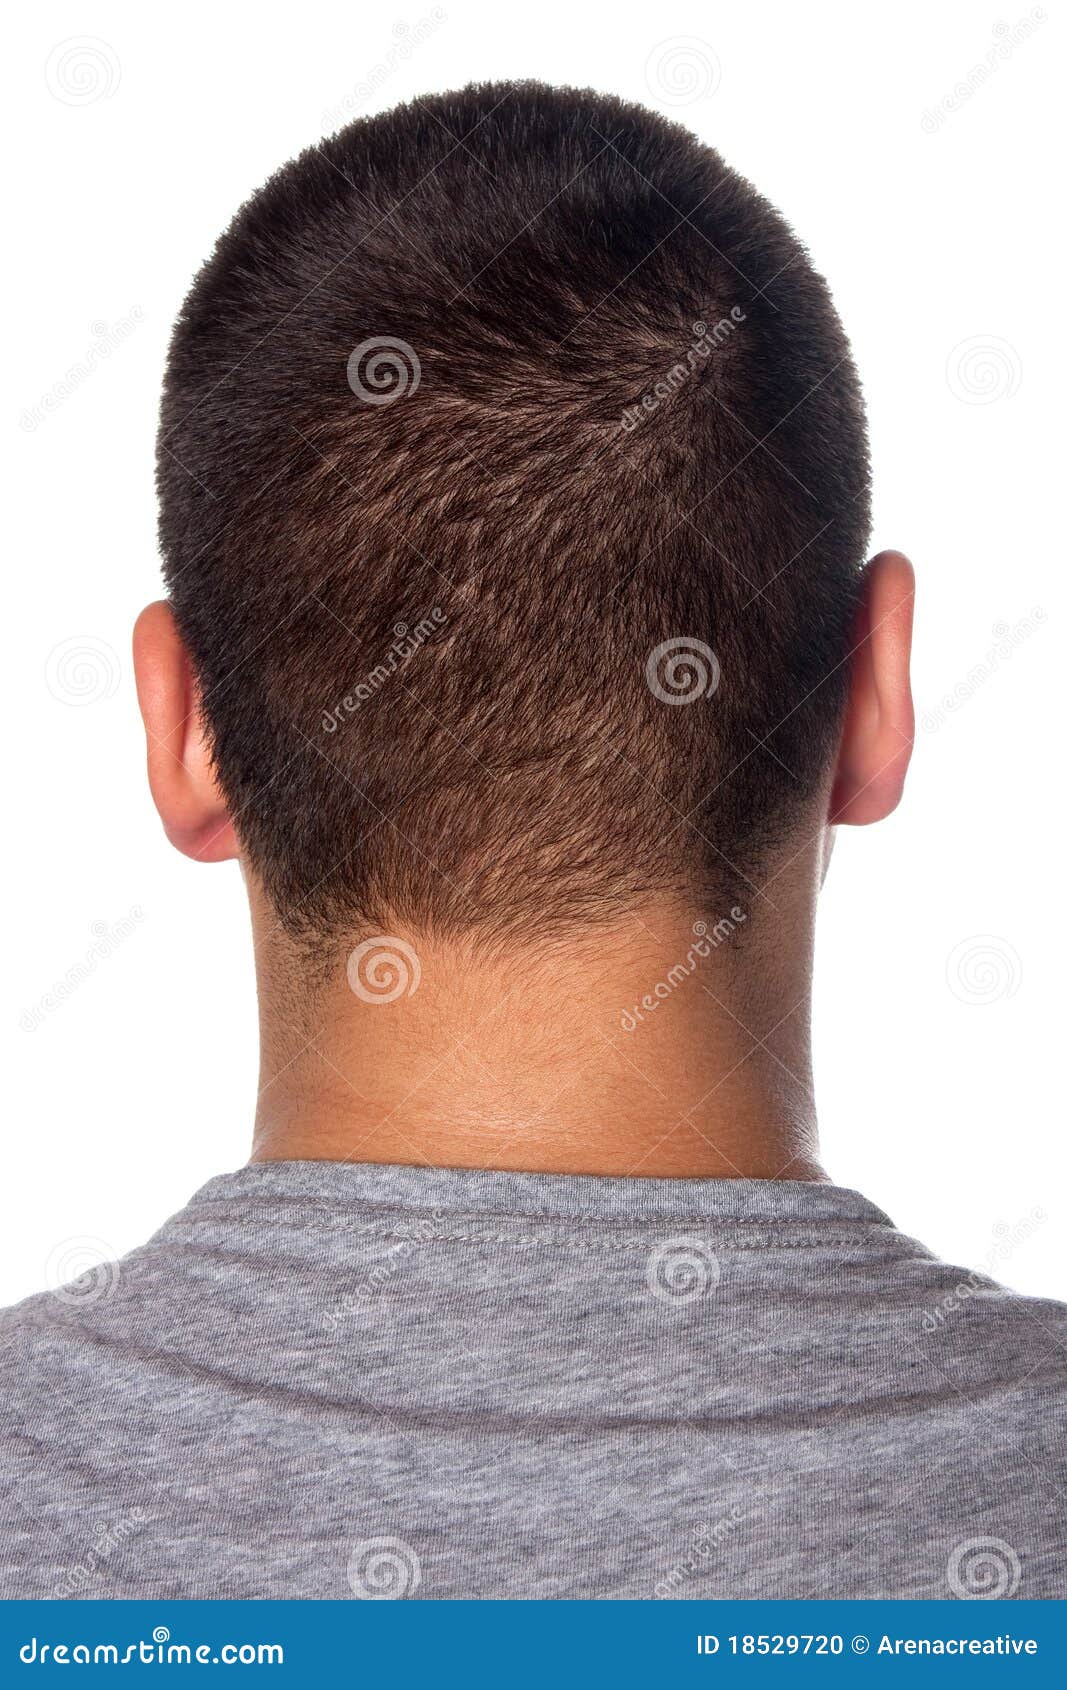 161 Back Head Mans Photos Free Royalty Free Stock Photos From Dreamstime